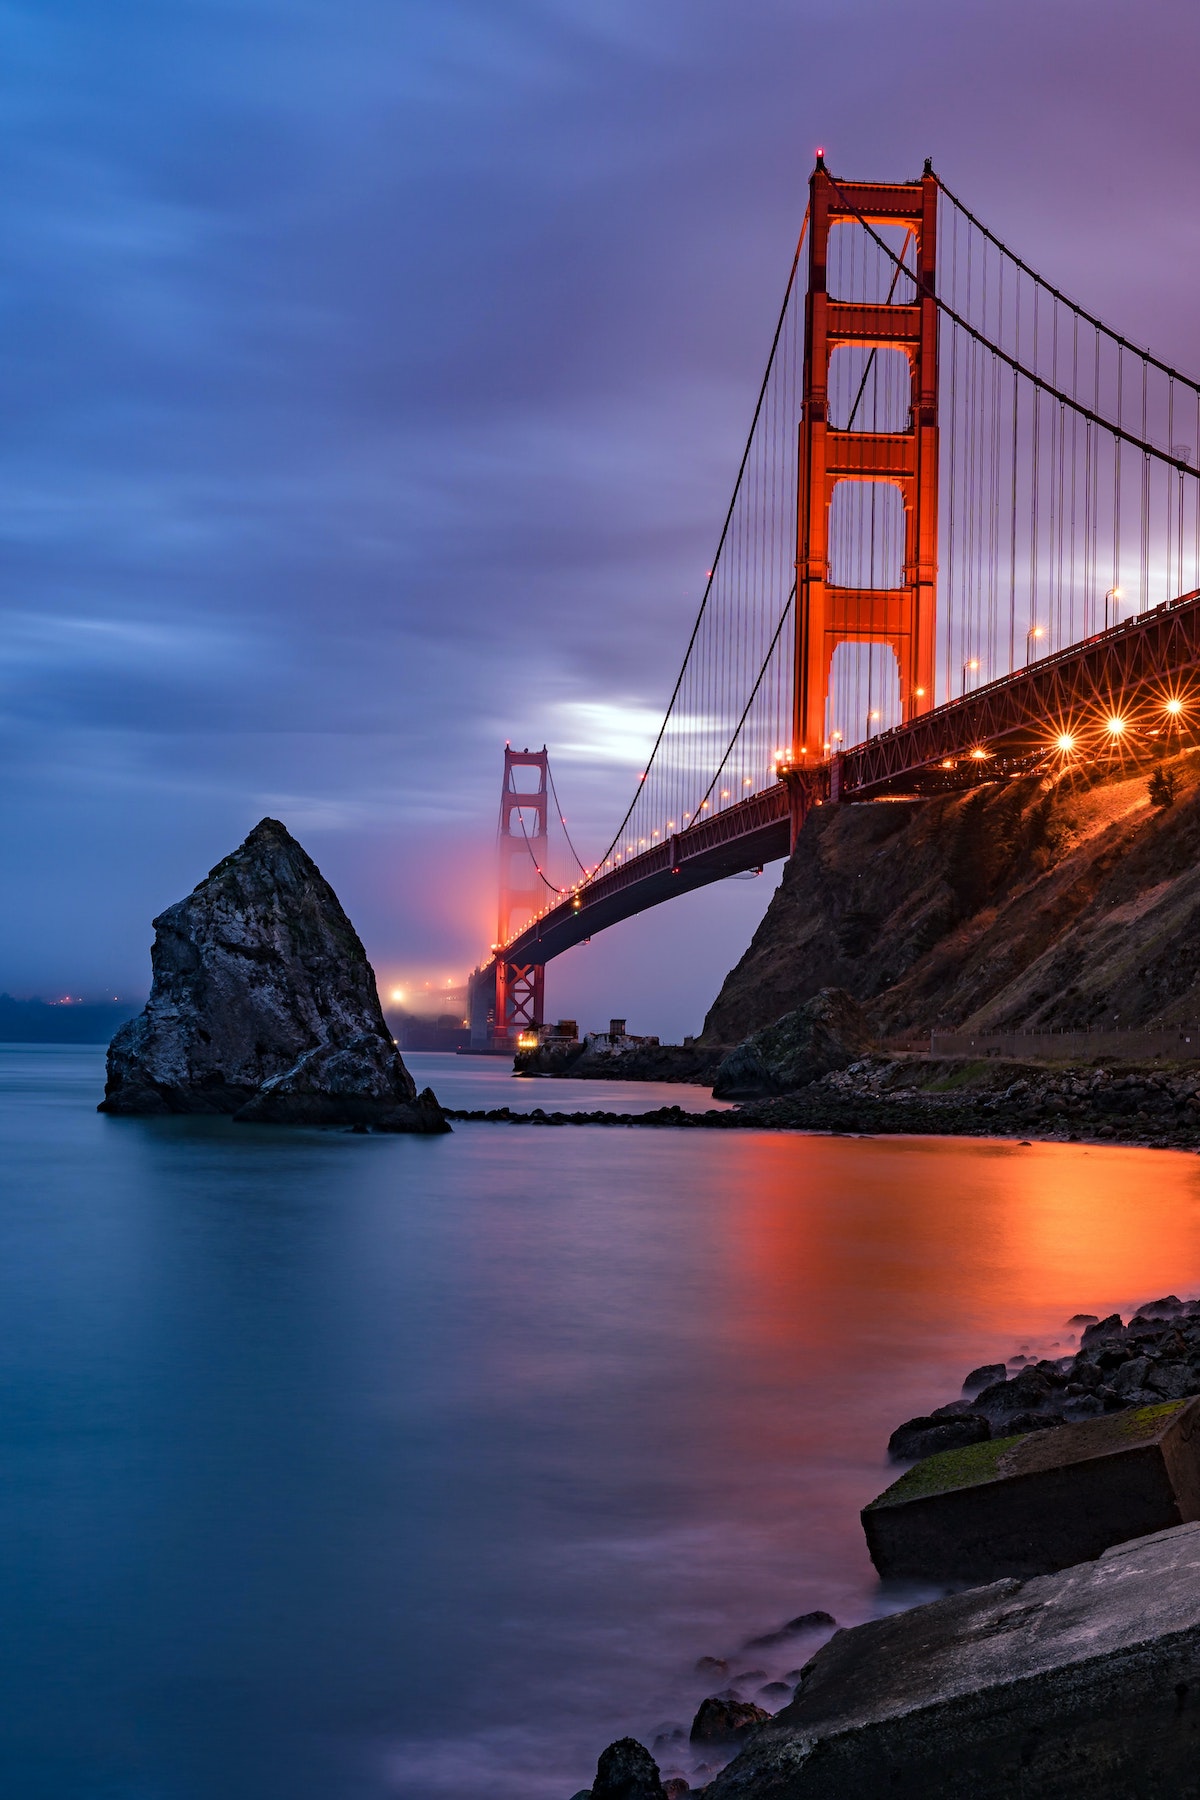 The Golden Gate Bridge at dusk with fog rolling in an the lights reflecting off the San Francisco bay.